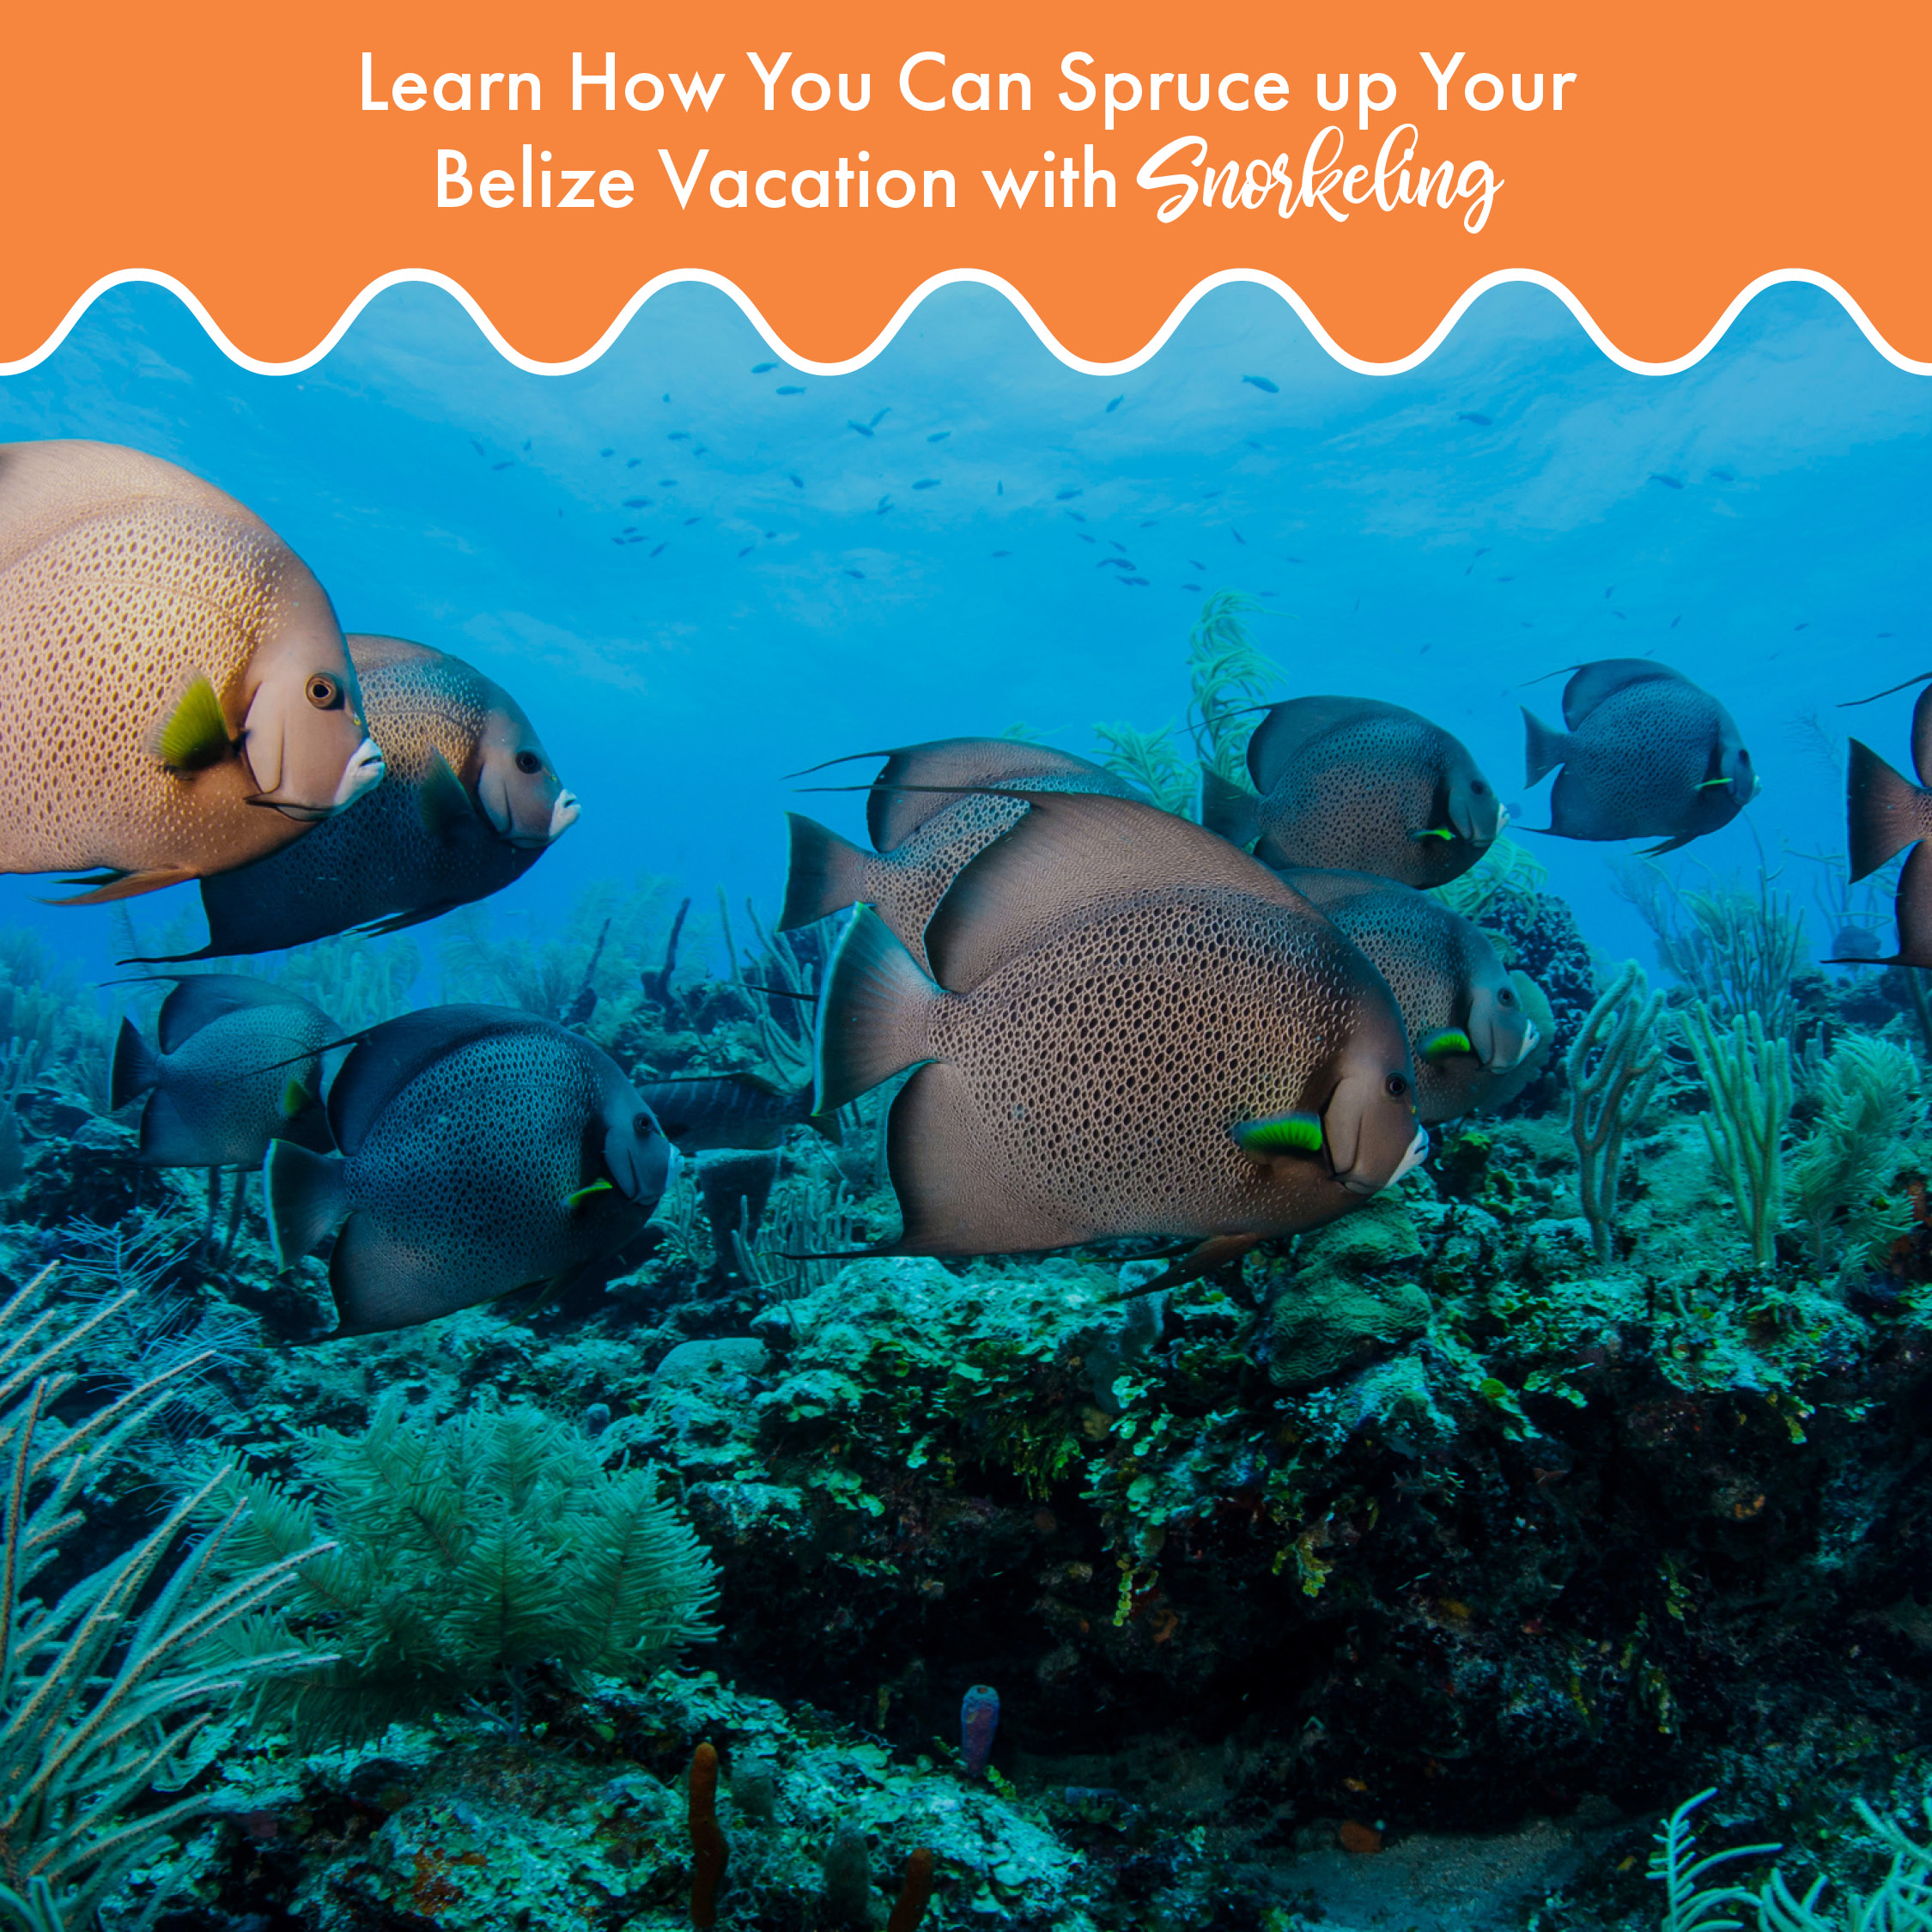 Learn-how-you-can-spruce-up-your-belize-vacation-with-snorkeling